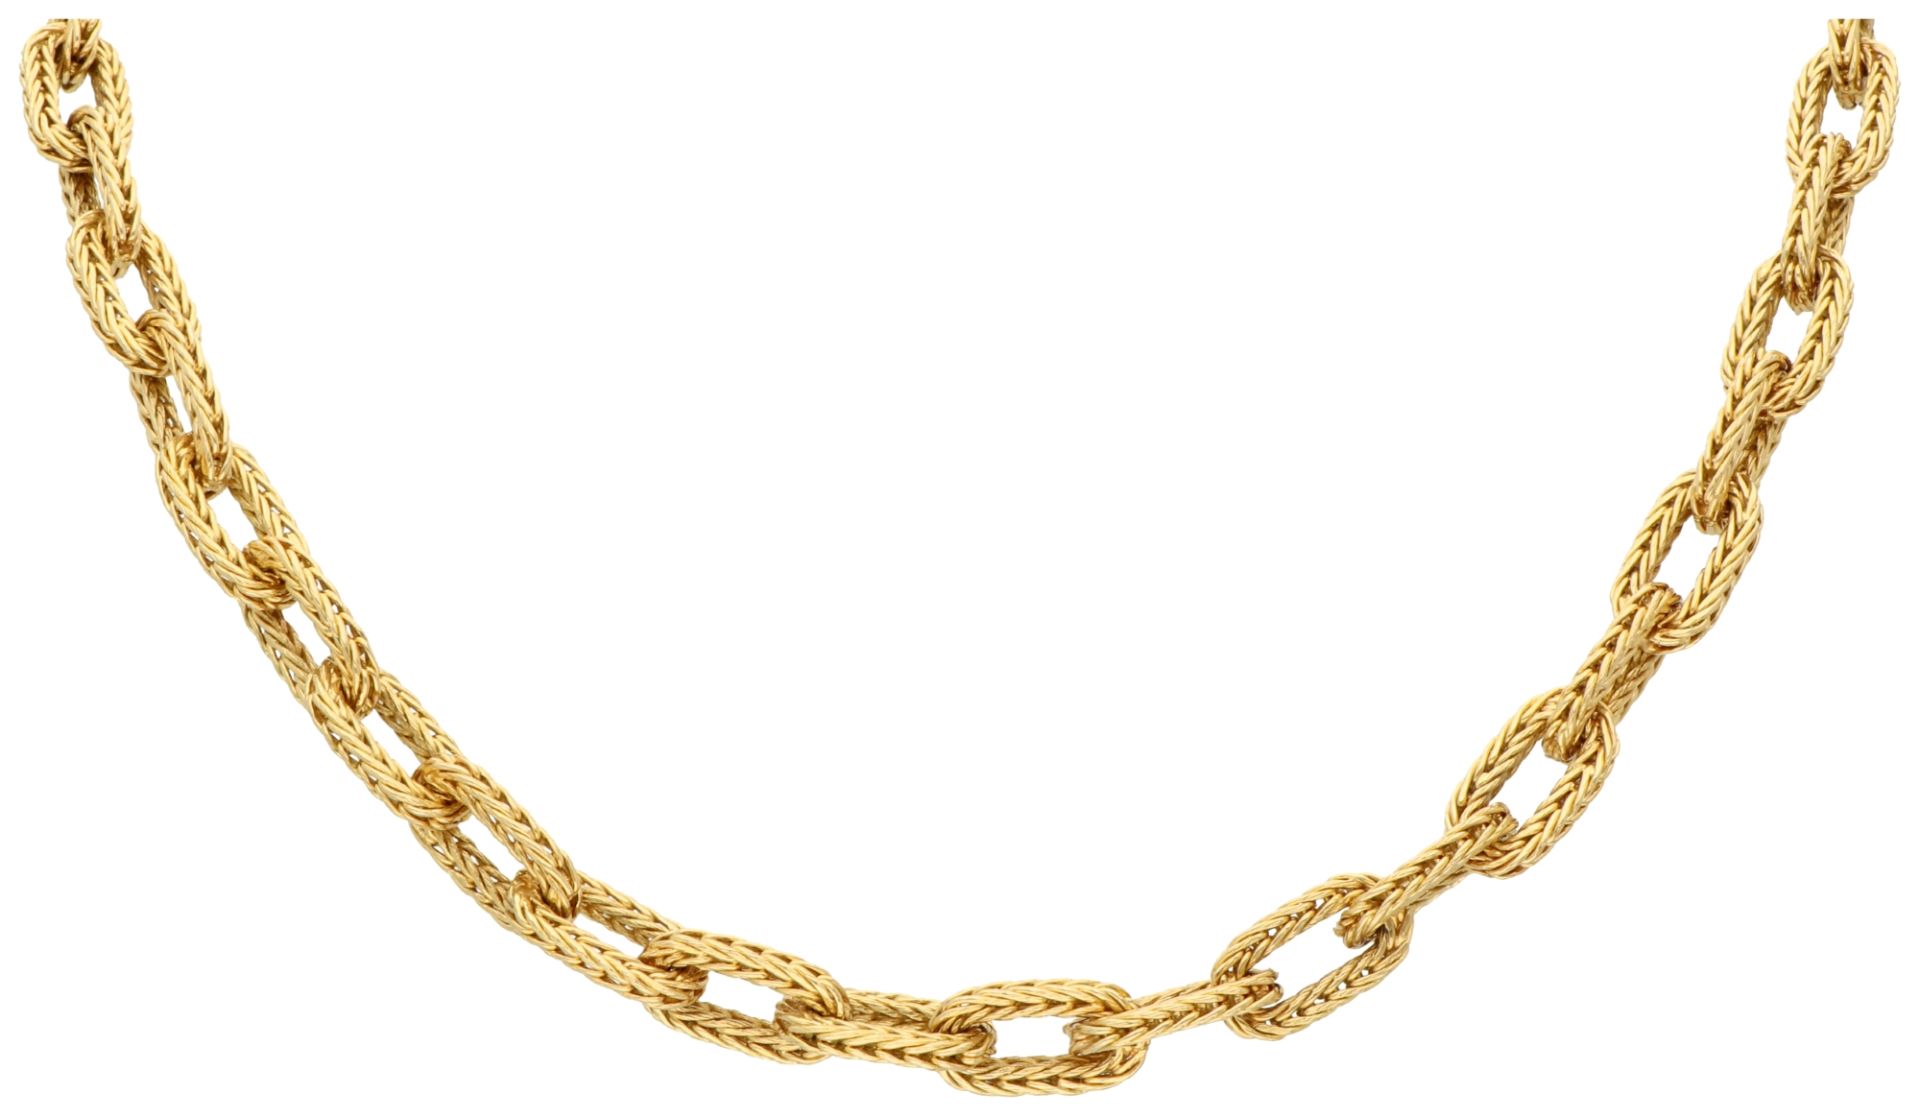 18K Yellow gold braided link necklace.